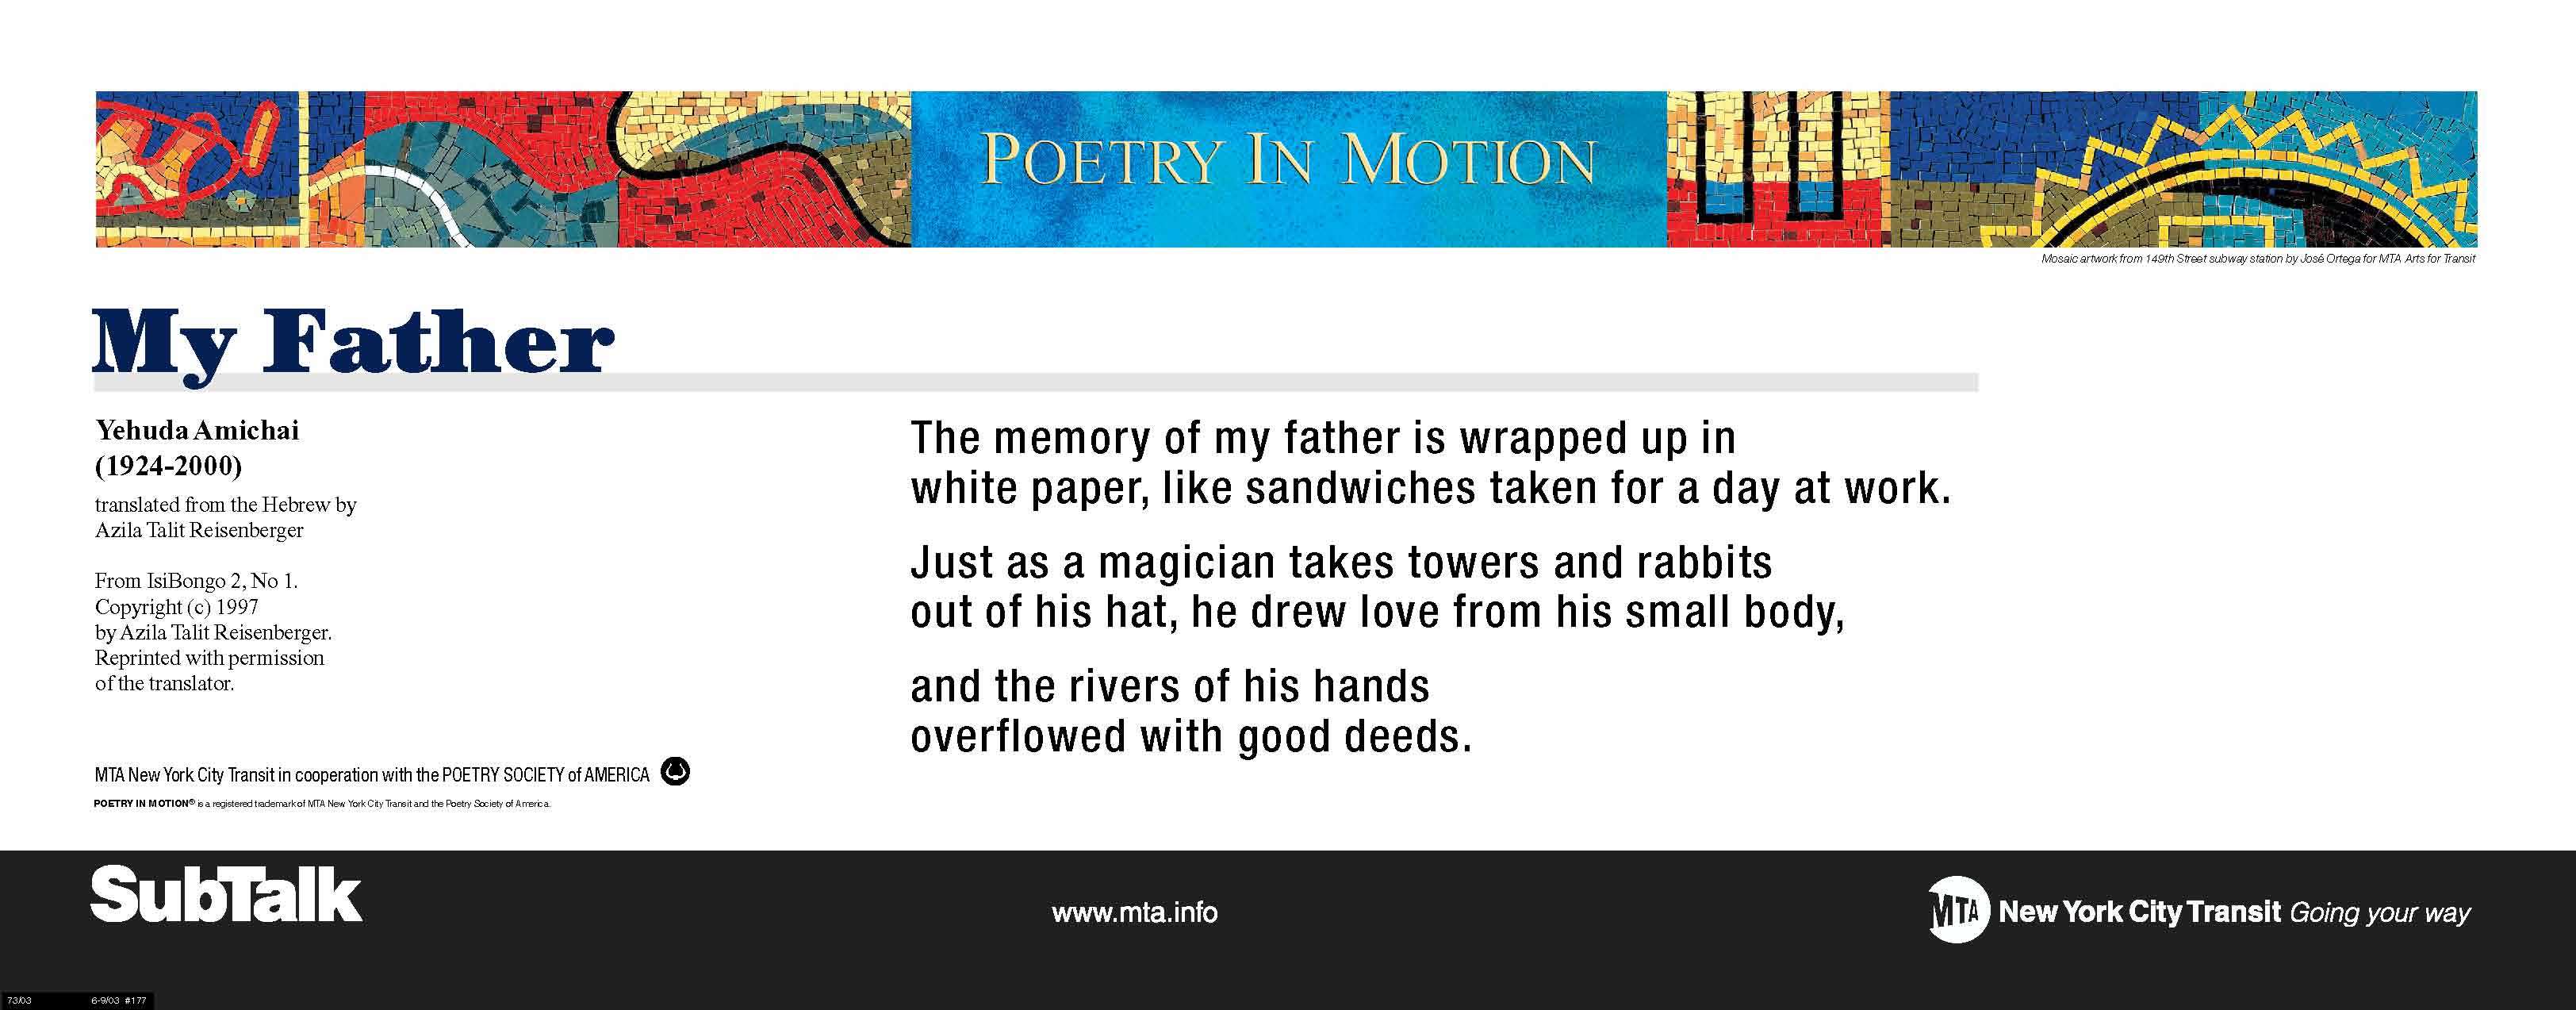 A horizontal poster with a colorful mosaic at the top features a poem titled My Father, by Yehuda Amichai